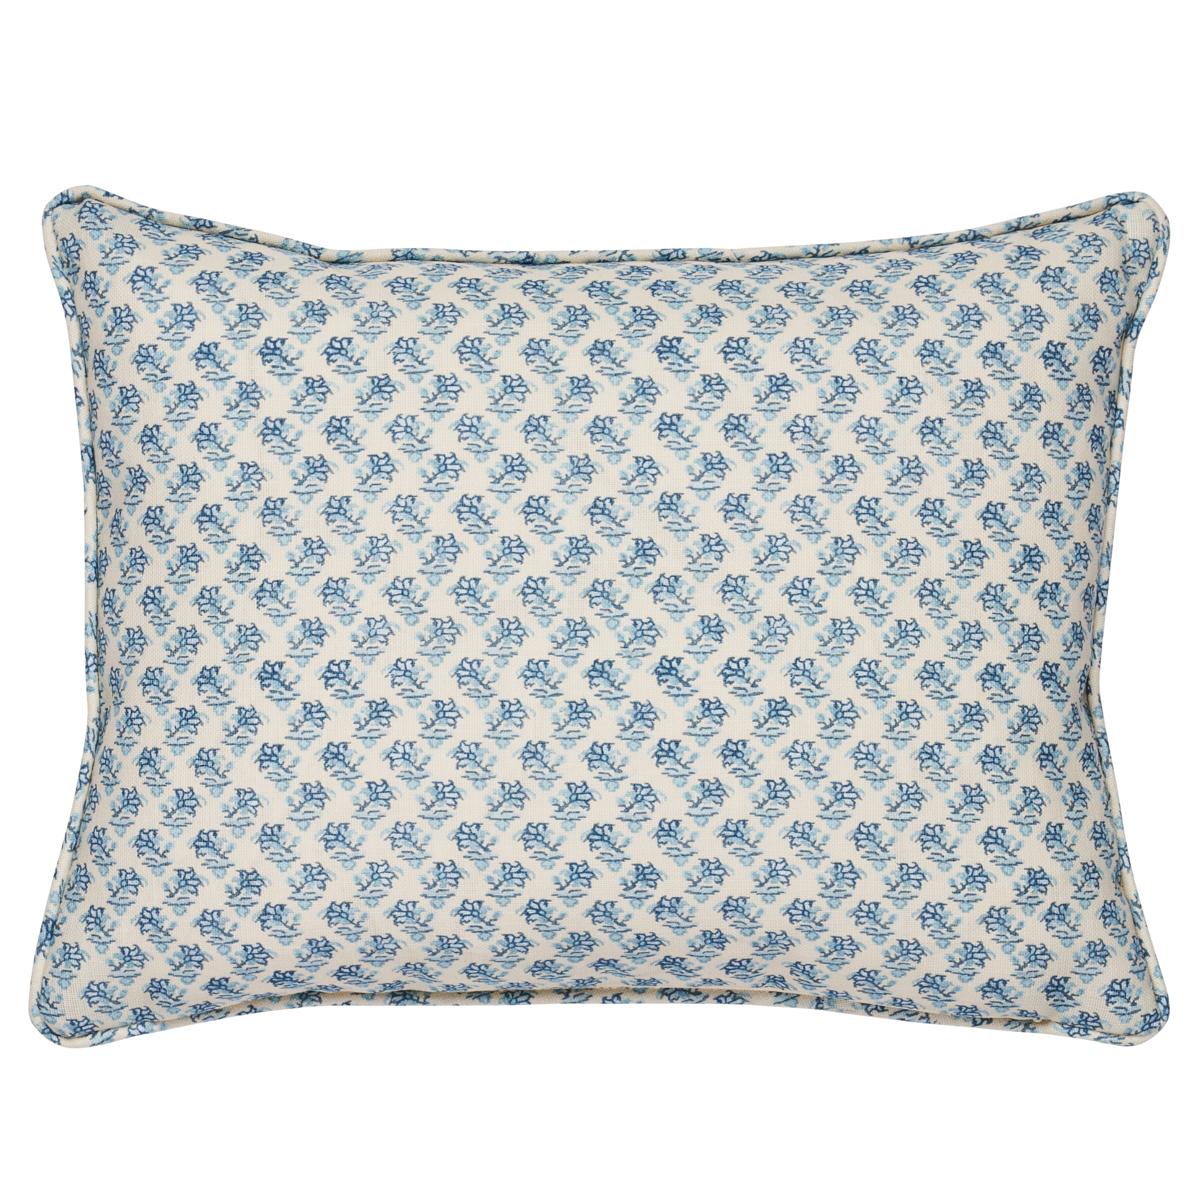 This pillow features Oleander Indoor/Outdoor by Mark D. Sikes for Schumacher with a self welt finish. Inspired by traditional Indian block prints, Oleander Indoor/Outdoor in indigo by Mark D. Sikes is a stylish high-performance fabric that can stand